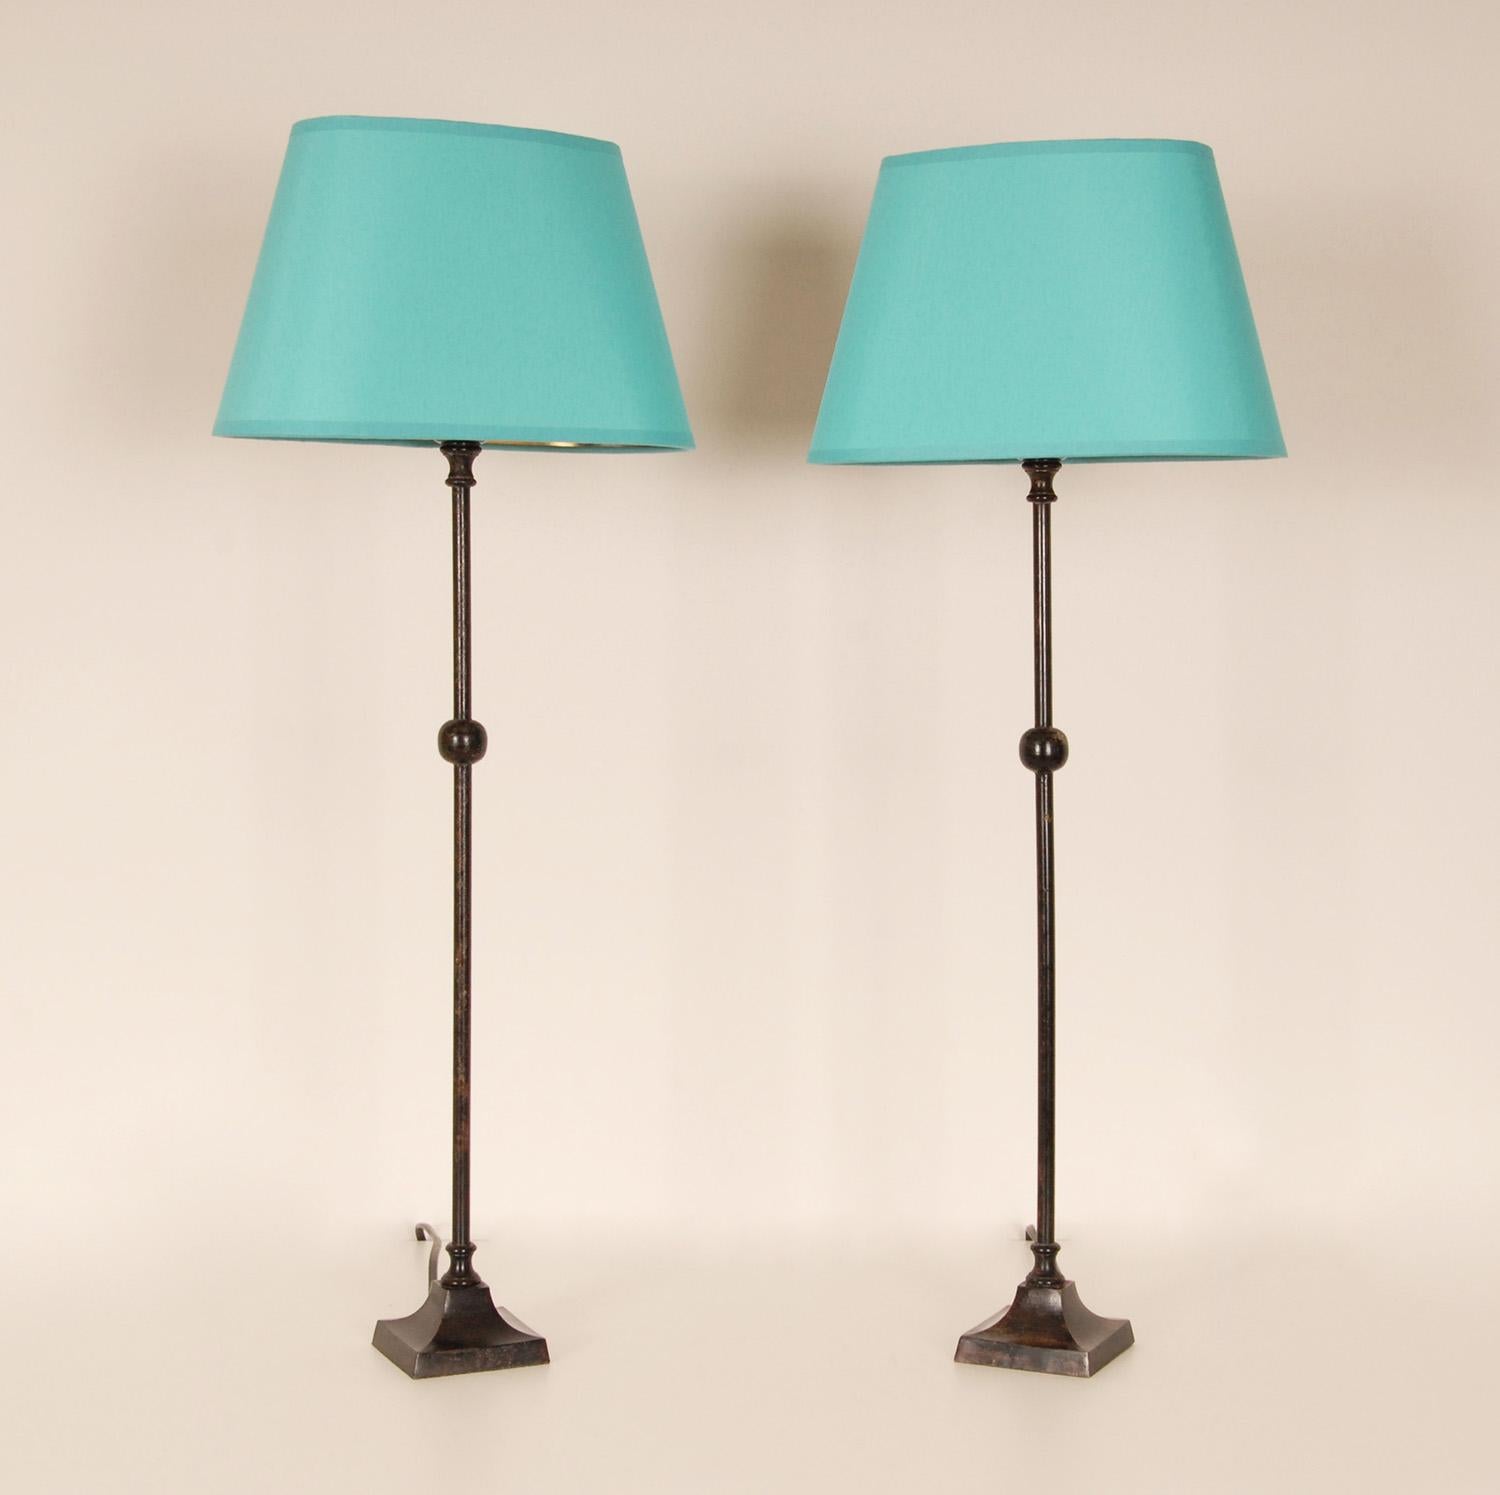 Vintage French Wrought iron table lamps Mid century 
Material: Cast Iron and Fabric
Style: Vintage, Art deco, Mid Century, Industrial
Design: In the style of Chapman, Jaques Adnet, Gilbert Poillerat.
Origin: France, 1970 - 1979
Color: Black,